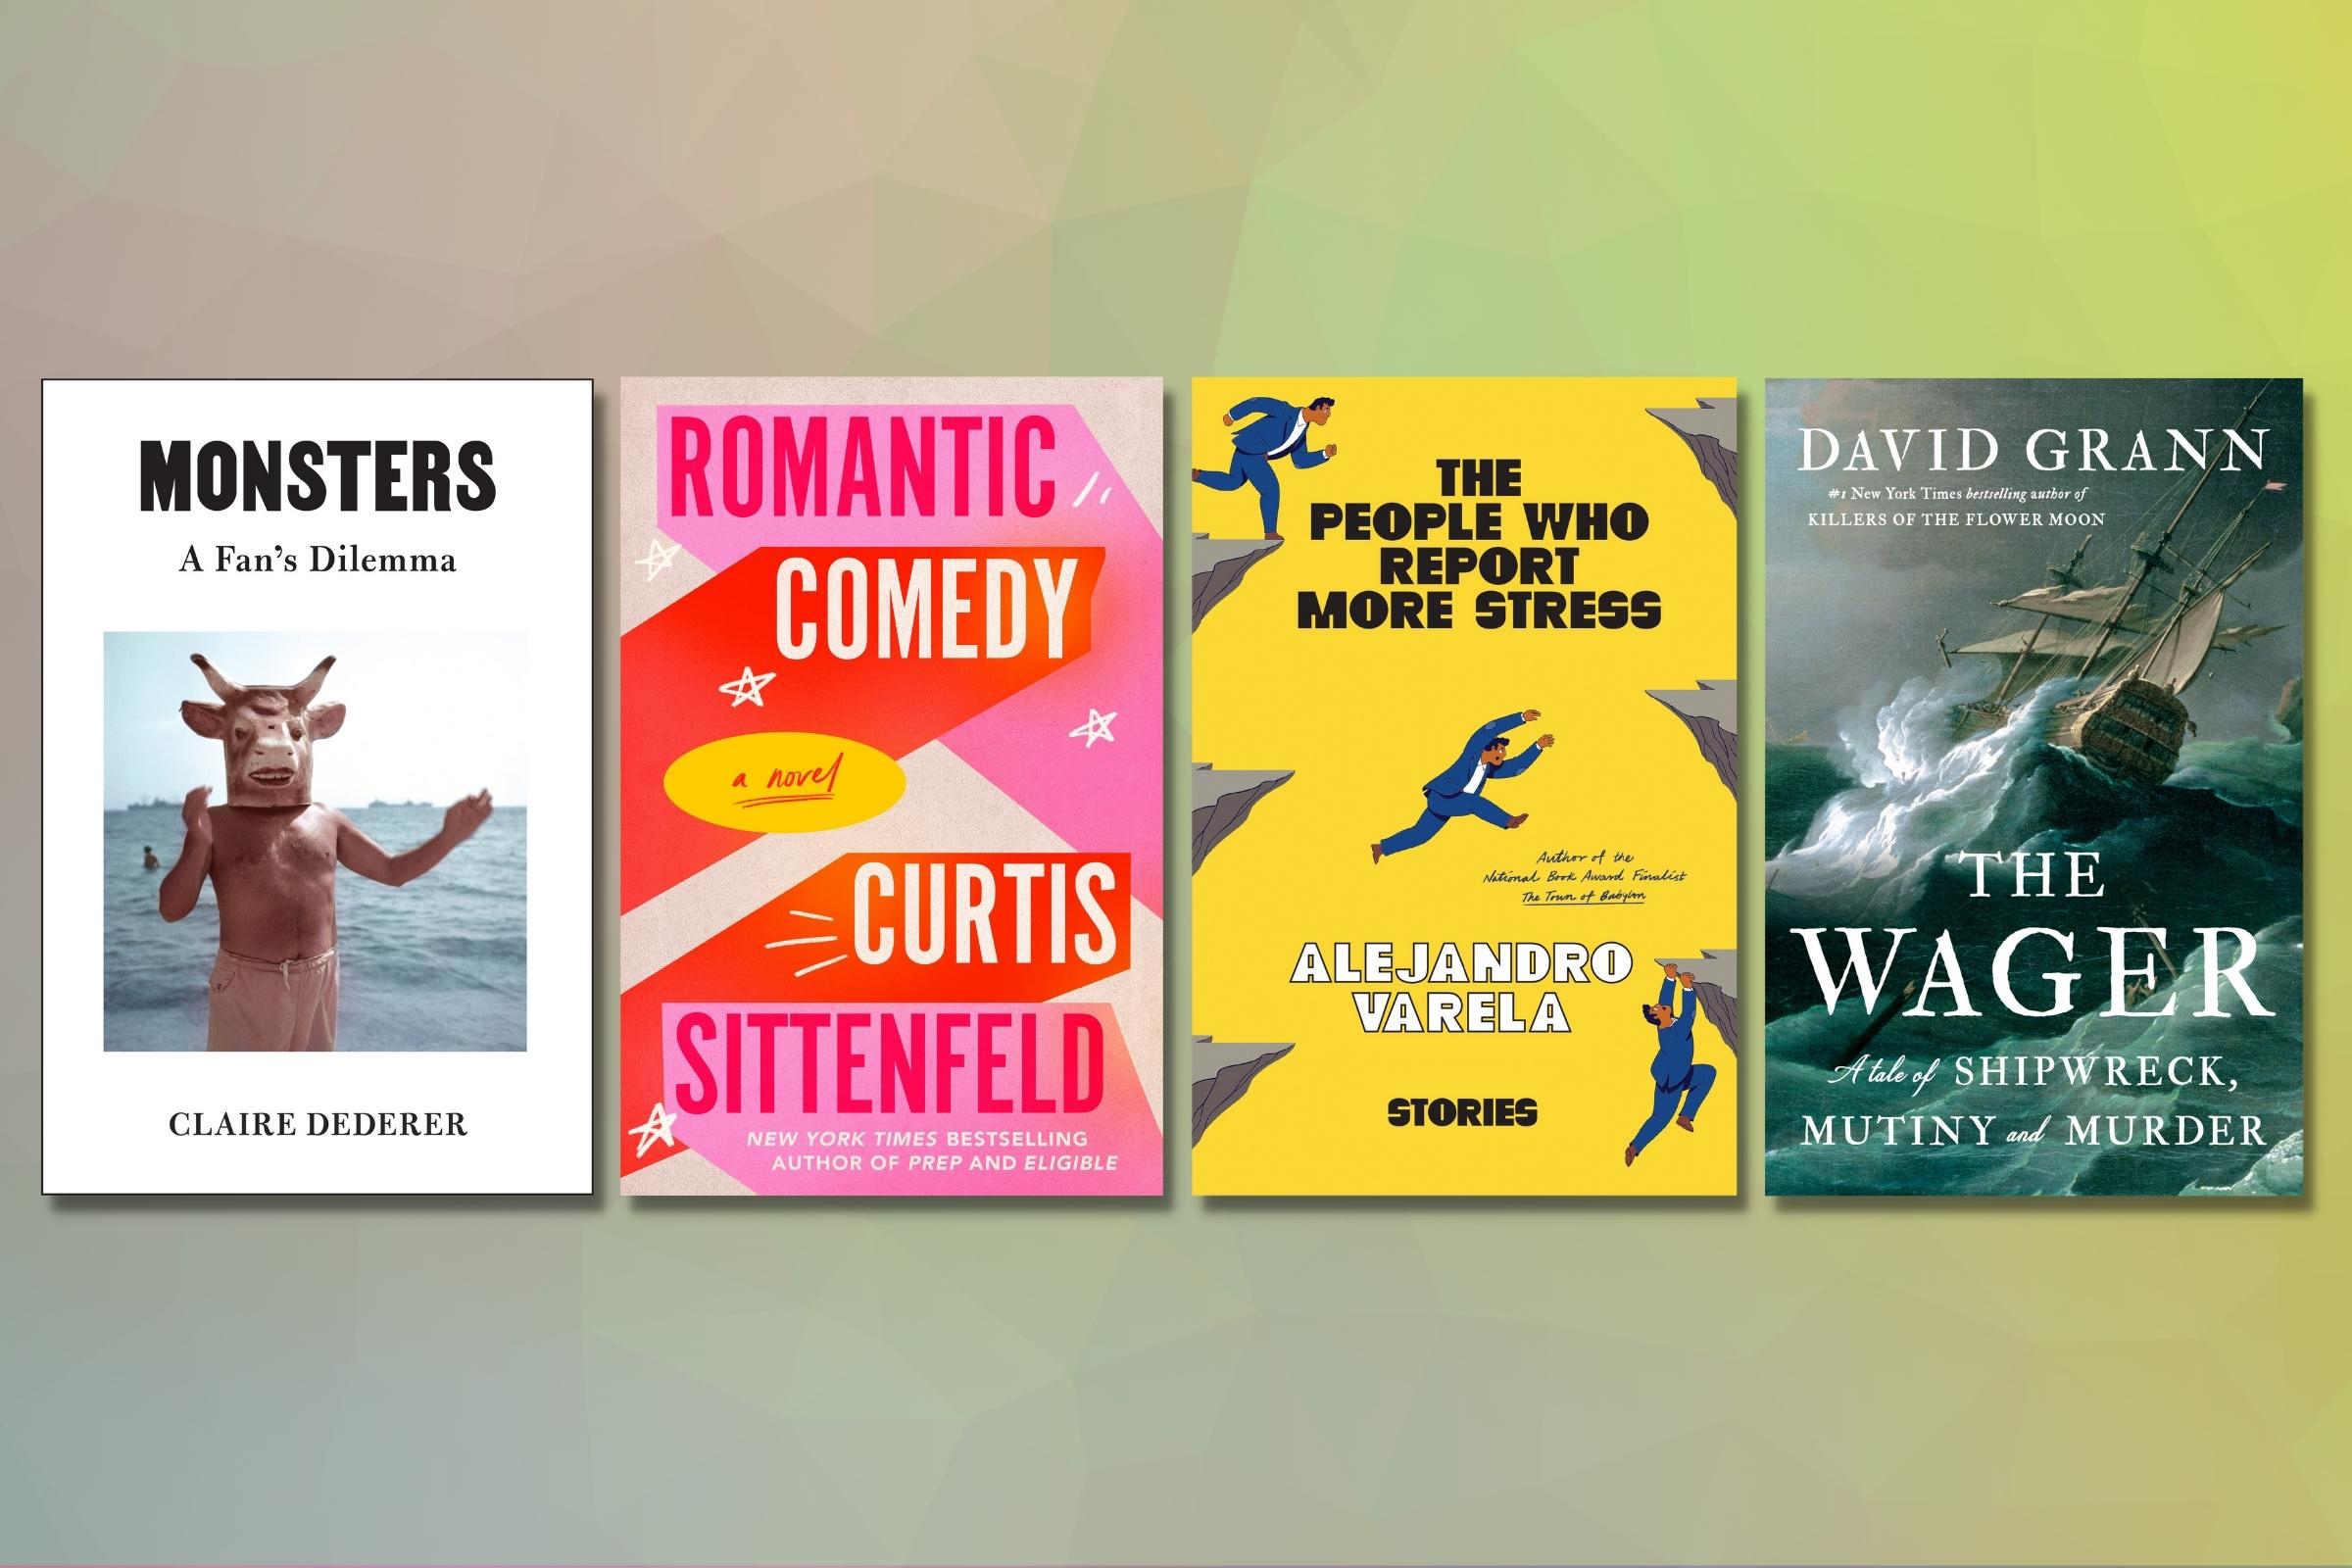 From Curtis Sittenfeld's 'Romantic Comedy' to David Grann's 'The Wager,' these are the best new books to read this month.